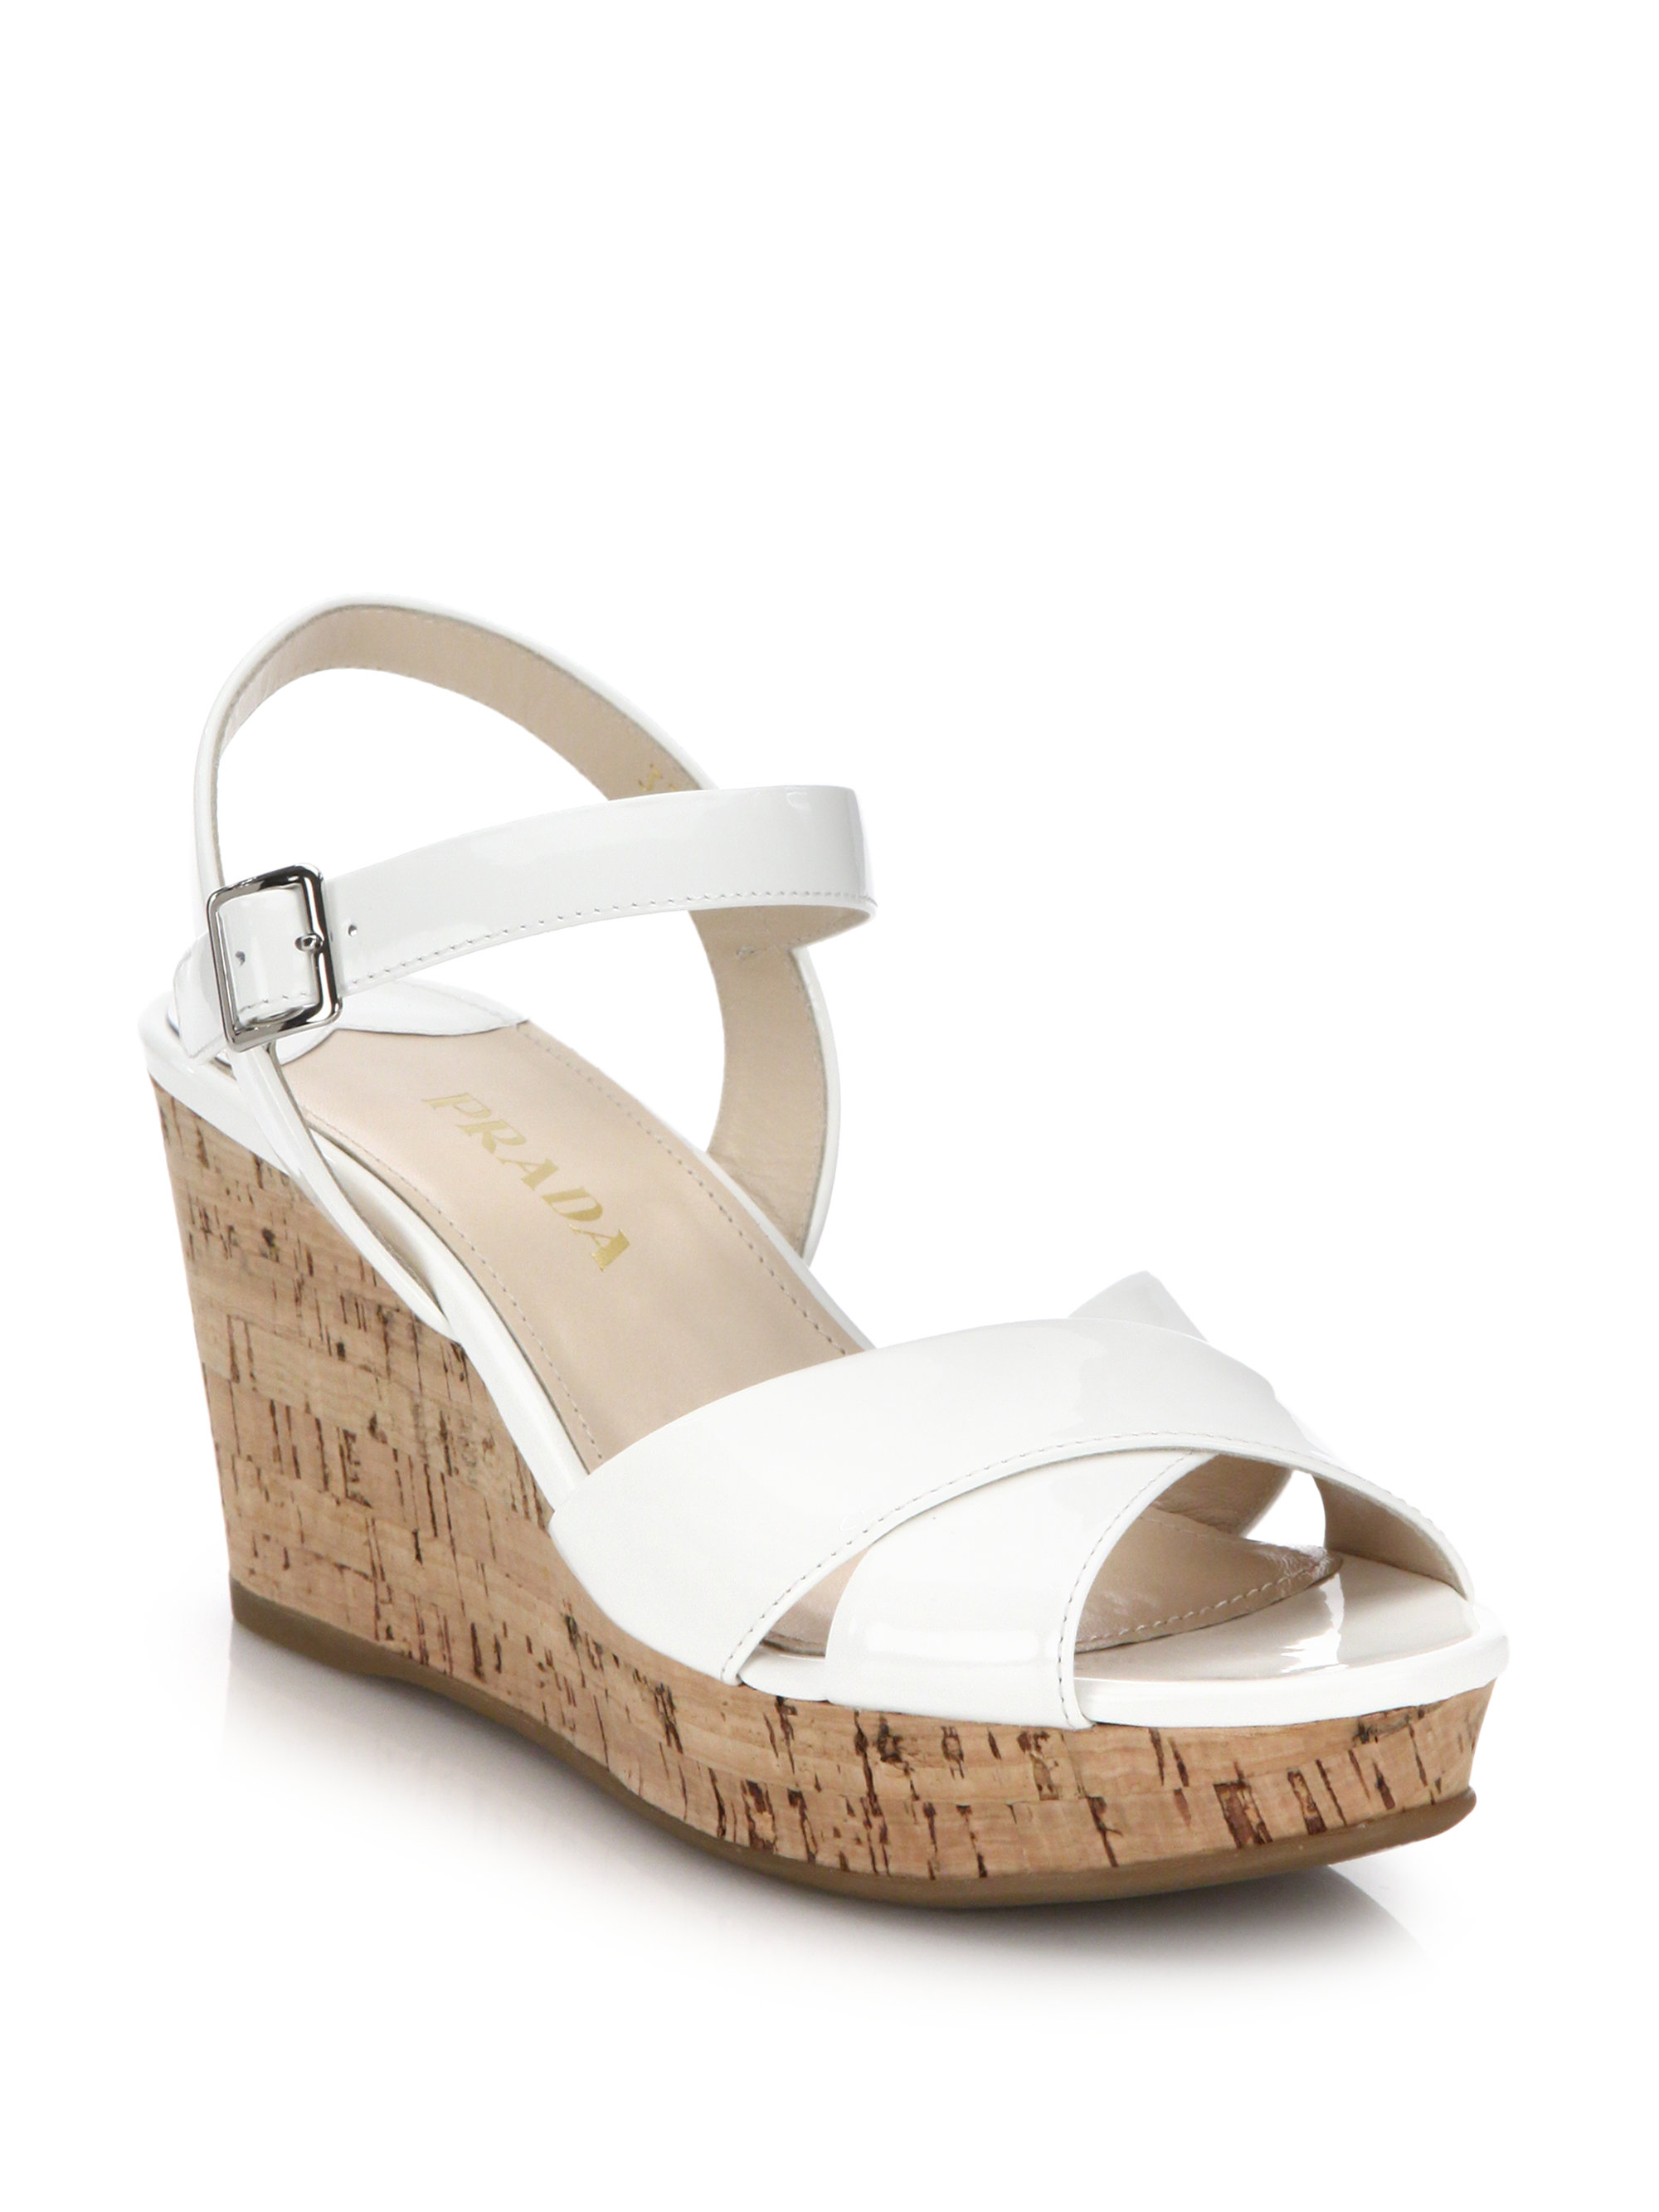 Prada Cork-wedge Patent Leather Sandals in White | Lyst